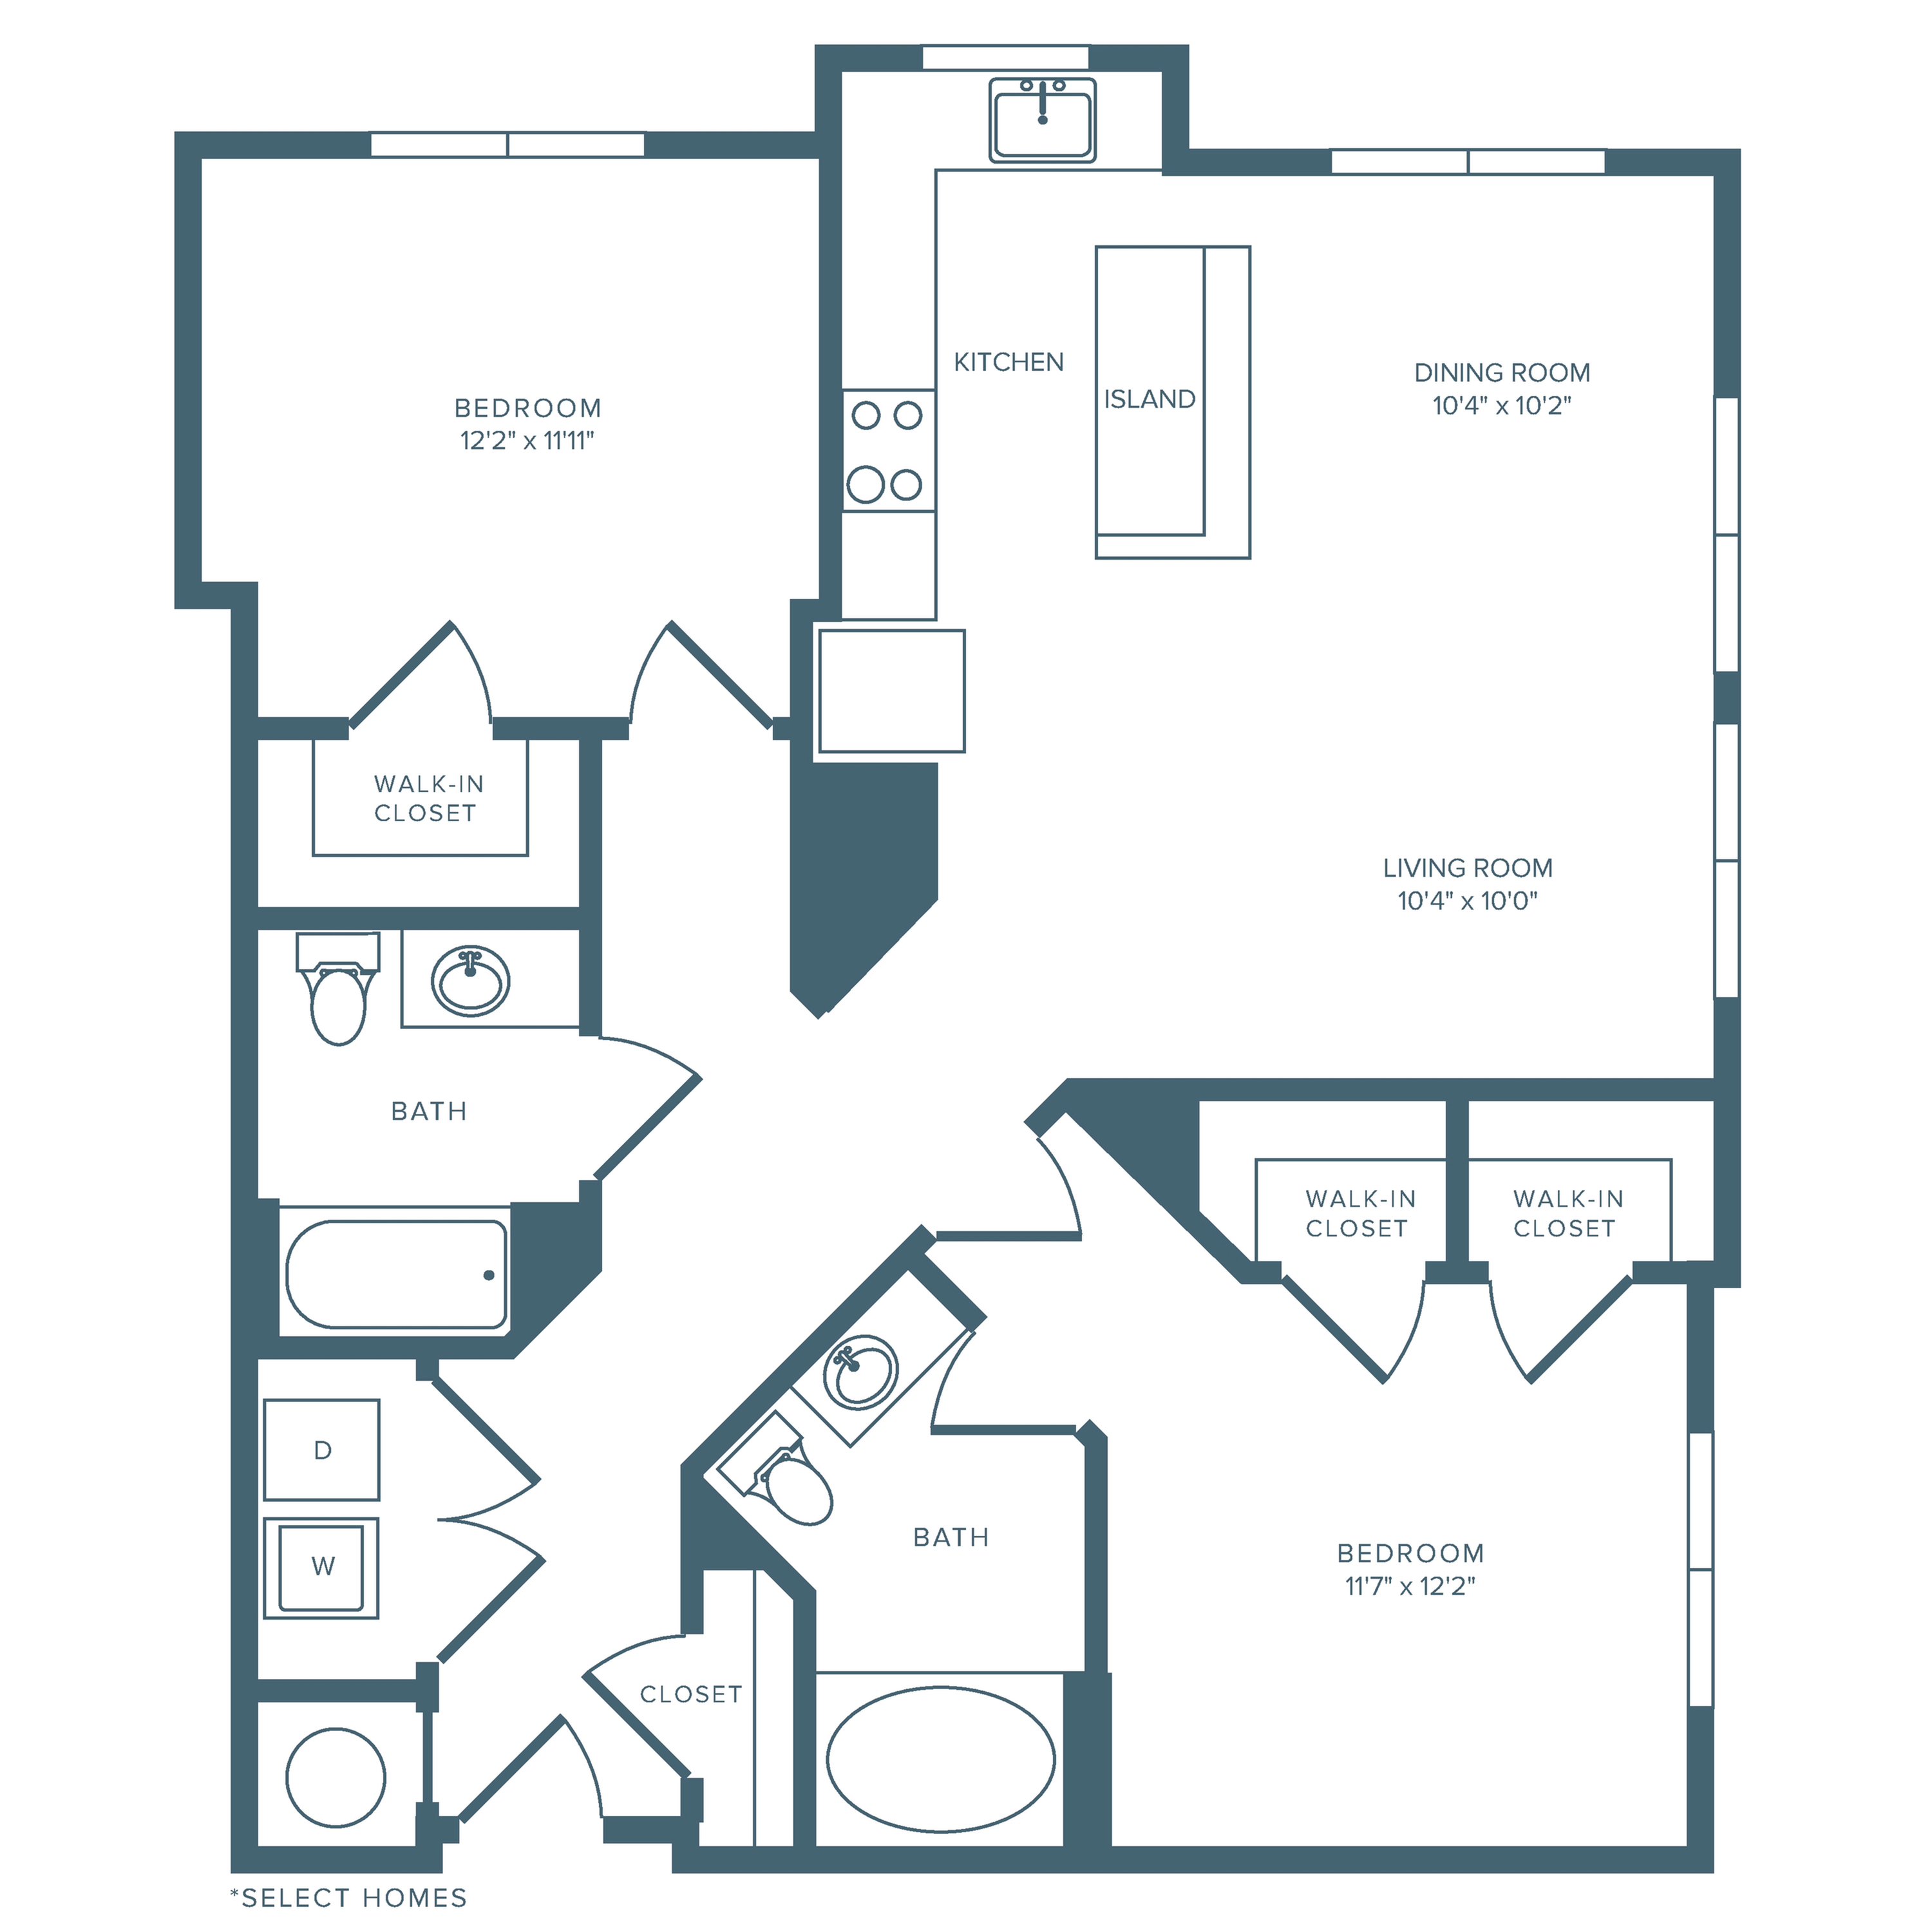 1102 square foot two bedroom two bath apartment floorplan image